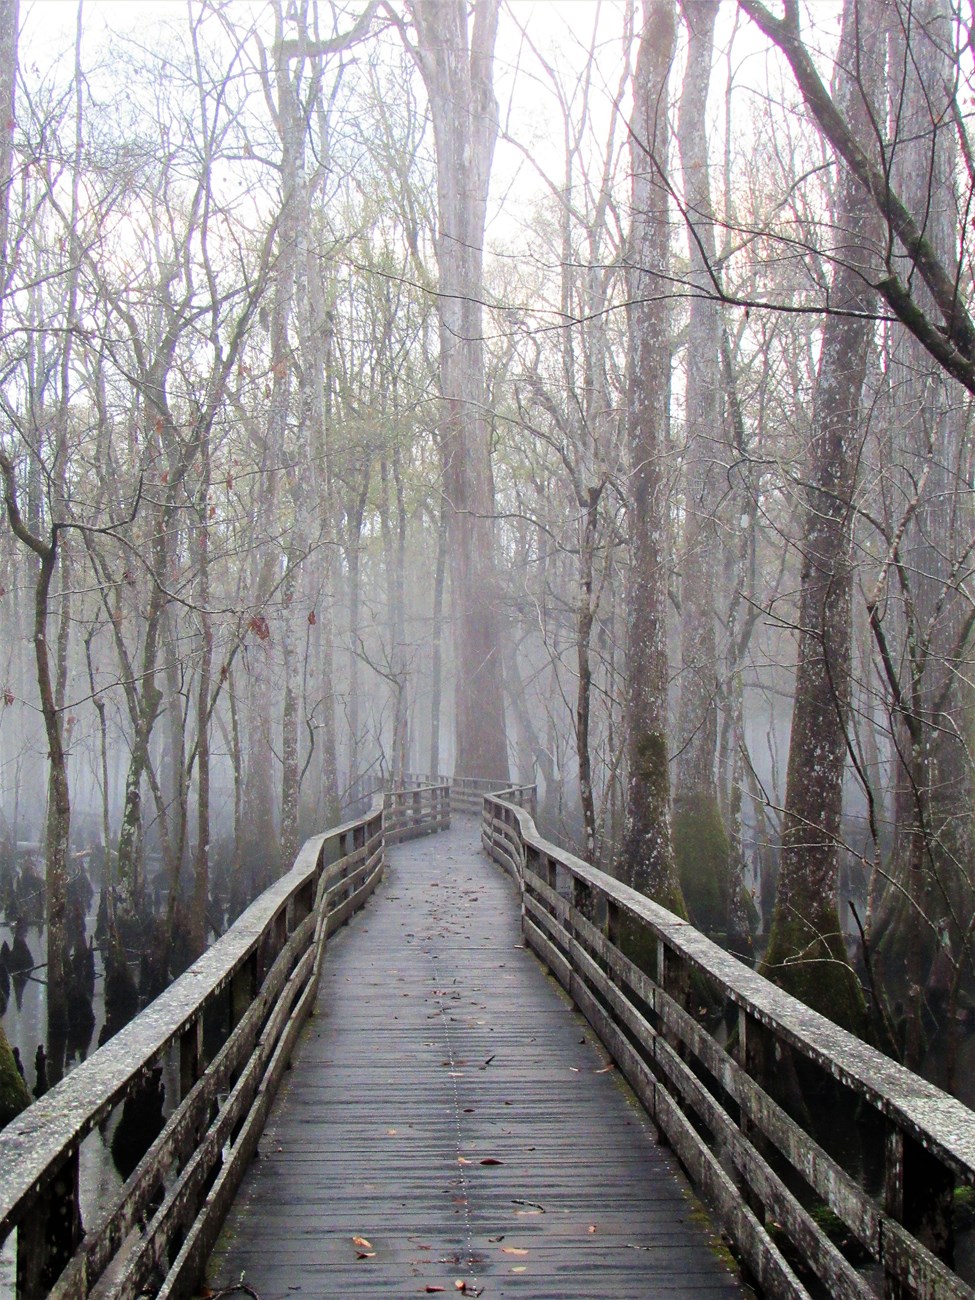 A wooden boardwalk snakes its way through leaf-less trees and into a thick fog.